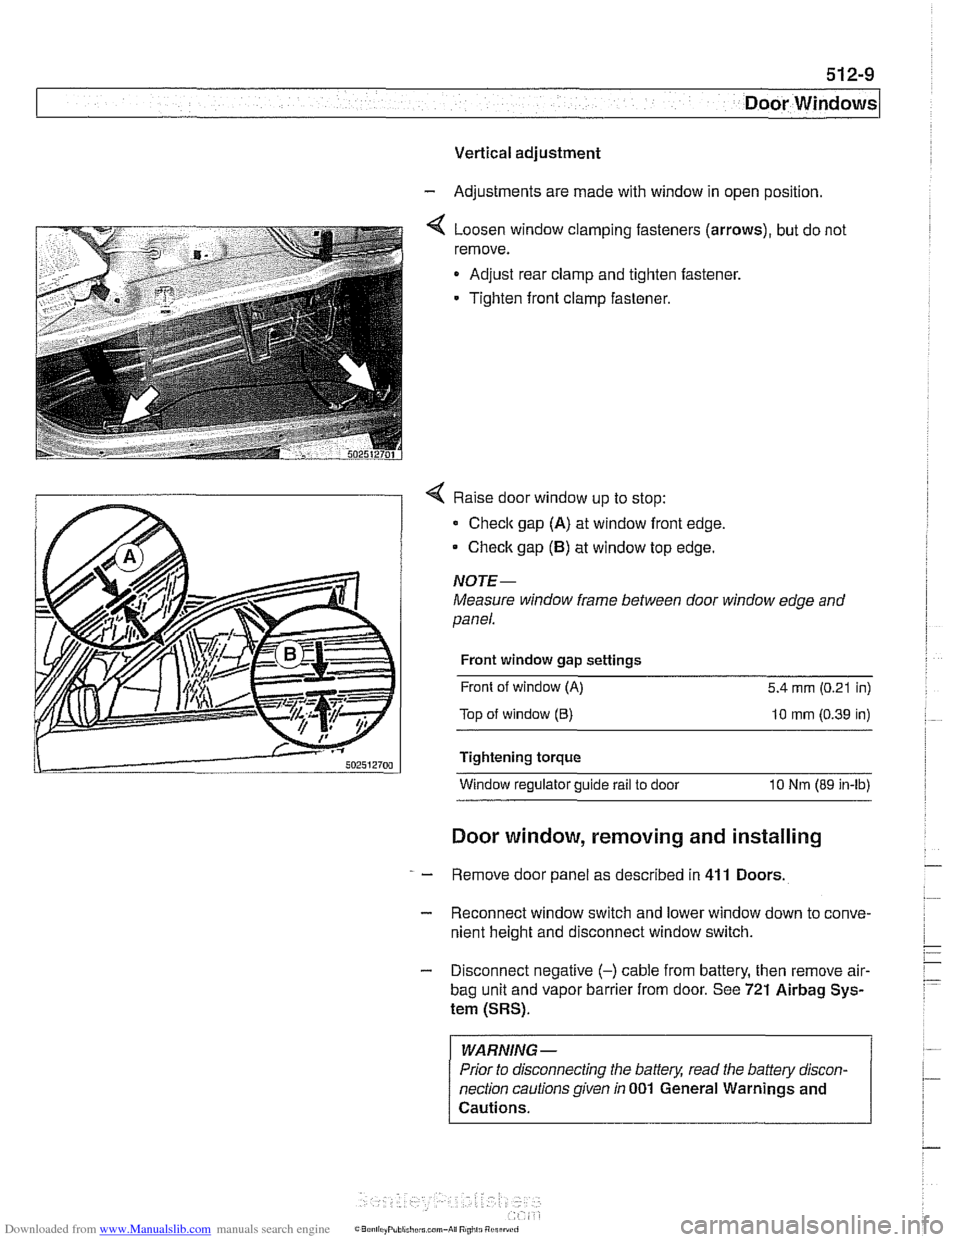 BMW 525i 1997 E39 Owners Manual Downloaded from www.Manualslib.com manuals search engine 
512-9 
Door Windows 
Vertical adjustment 
- Adjustments  are made with  window in open position 
4 Loosen window  clamping fasteners  (arrows)